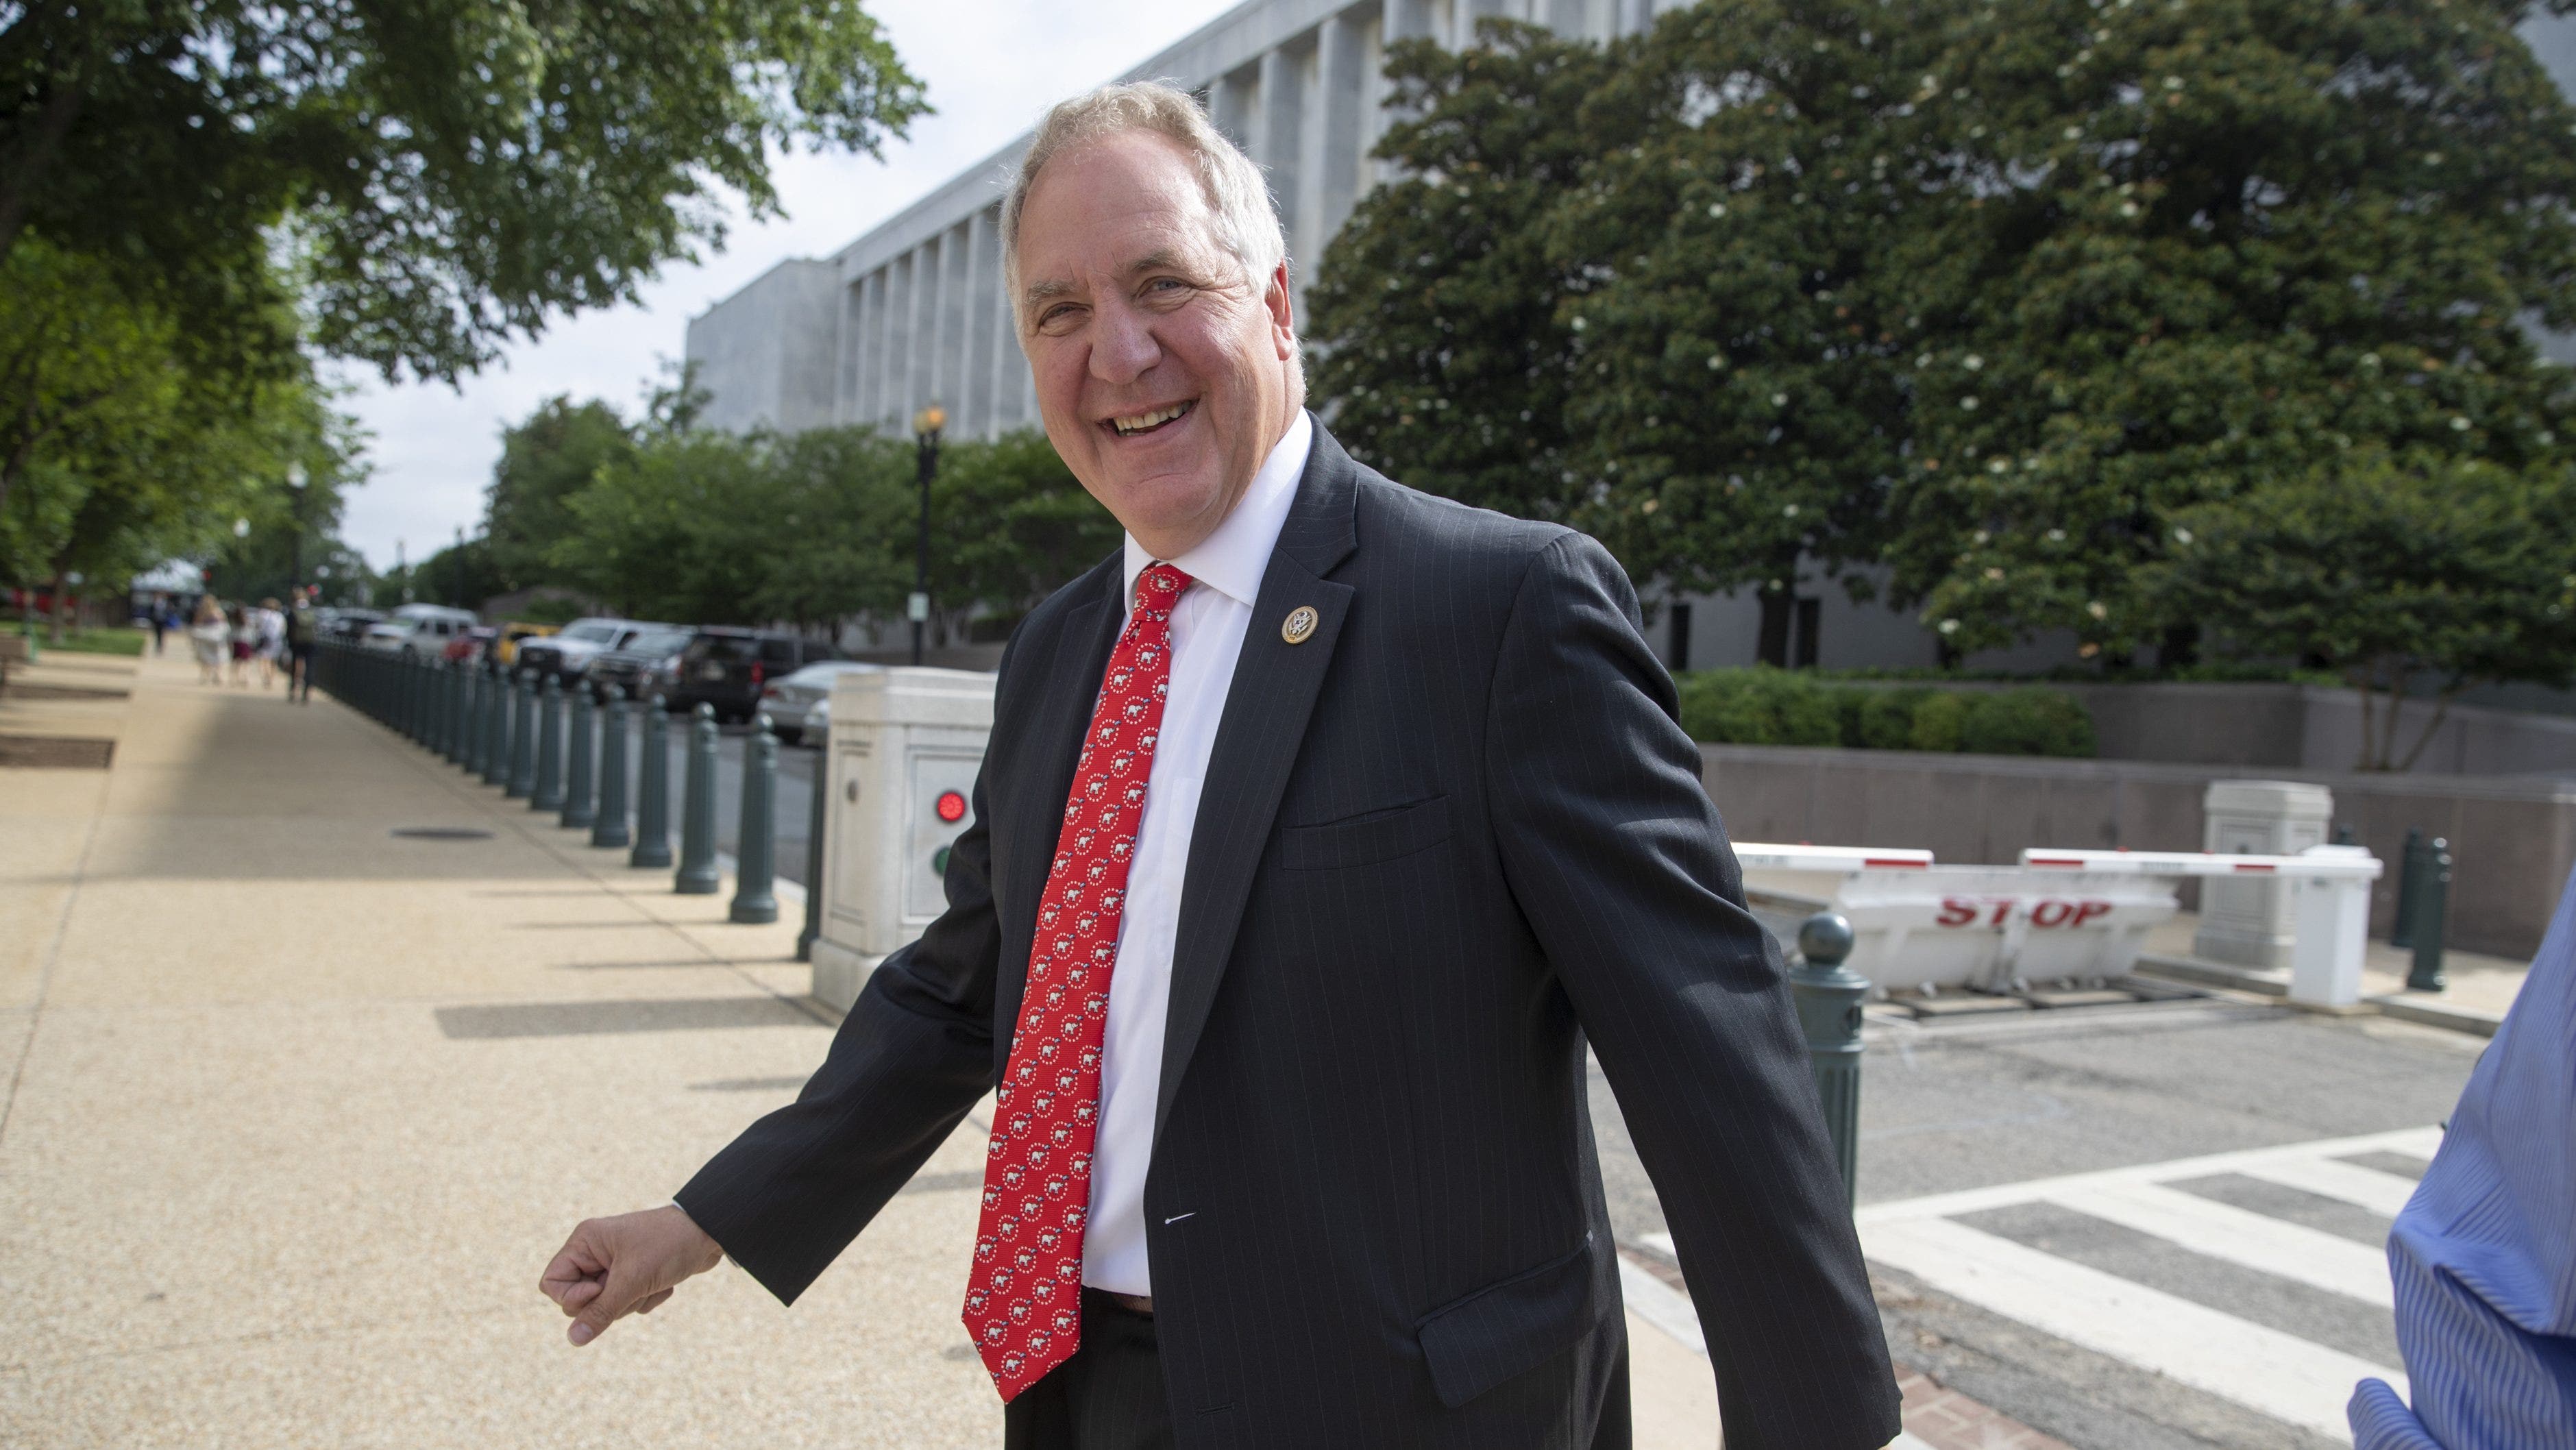 FOX NEWS: Rep. John Shimkus becomes latest Republican lawmaker to retire from Congress